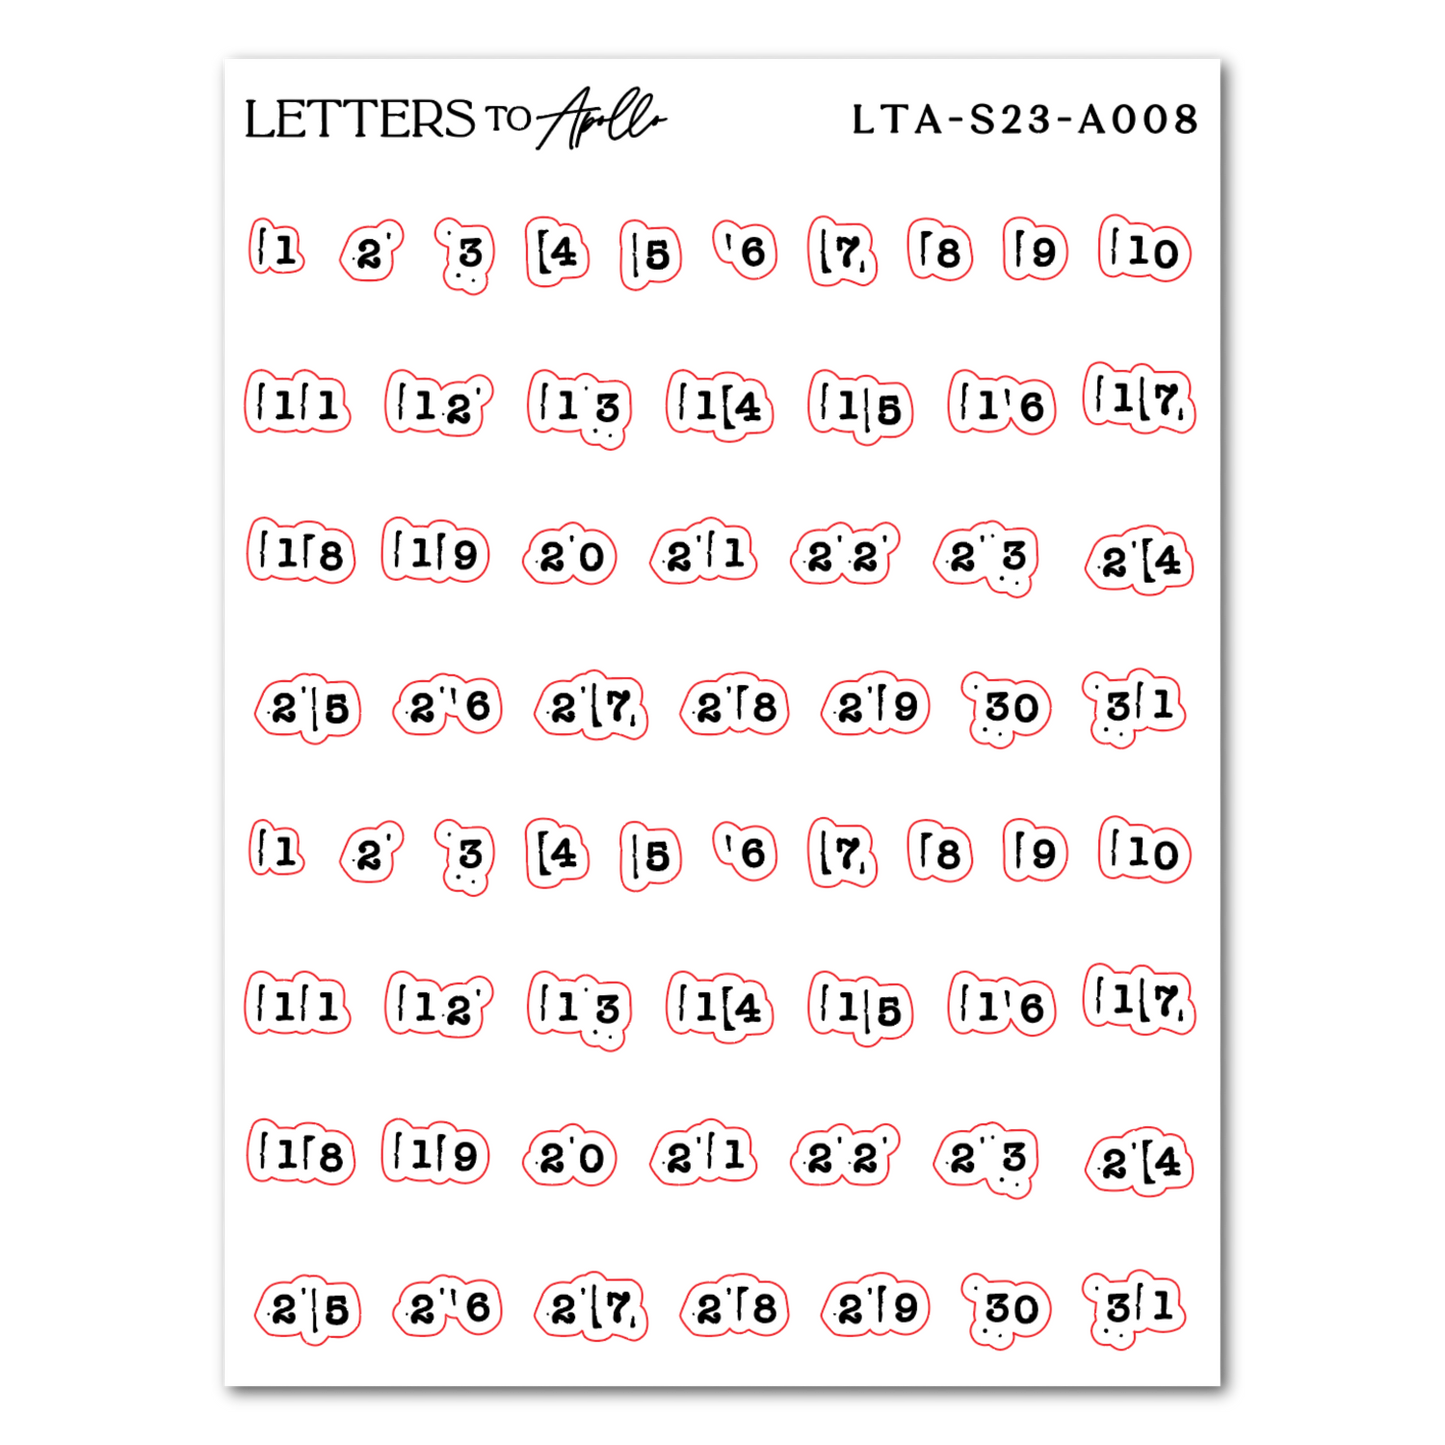 STAMP NUMBERS